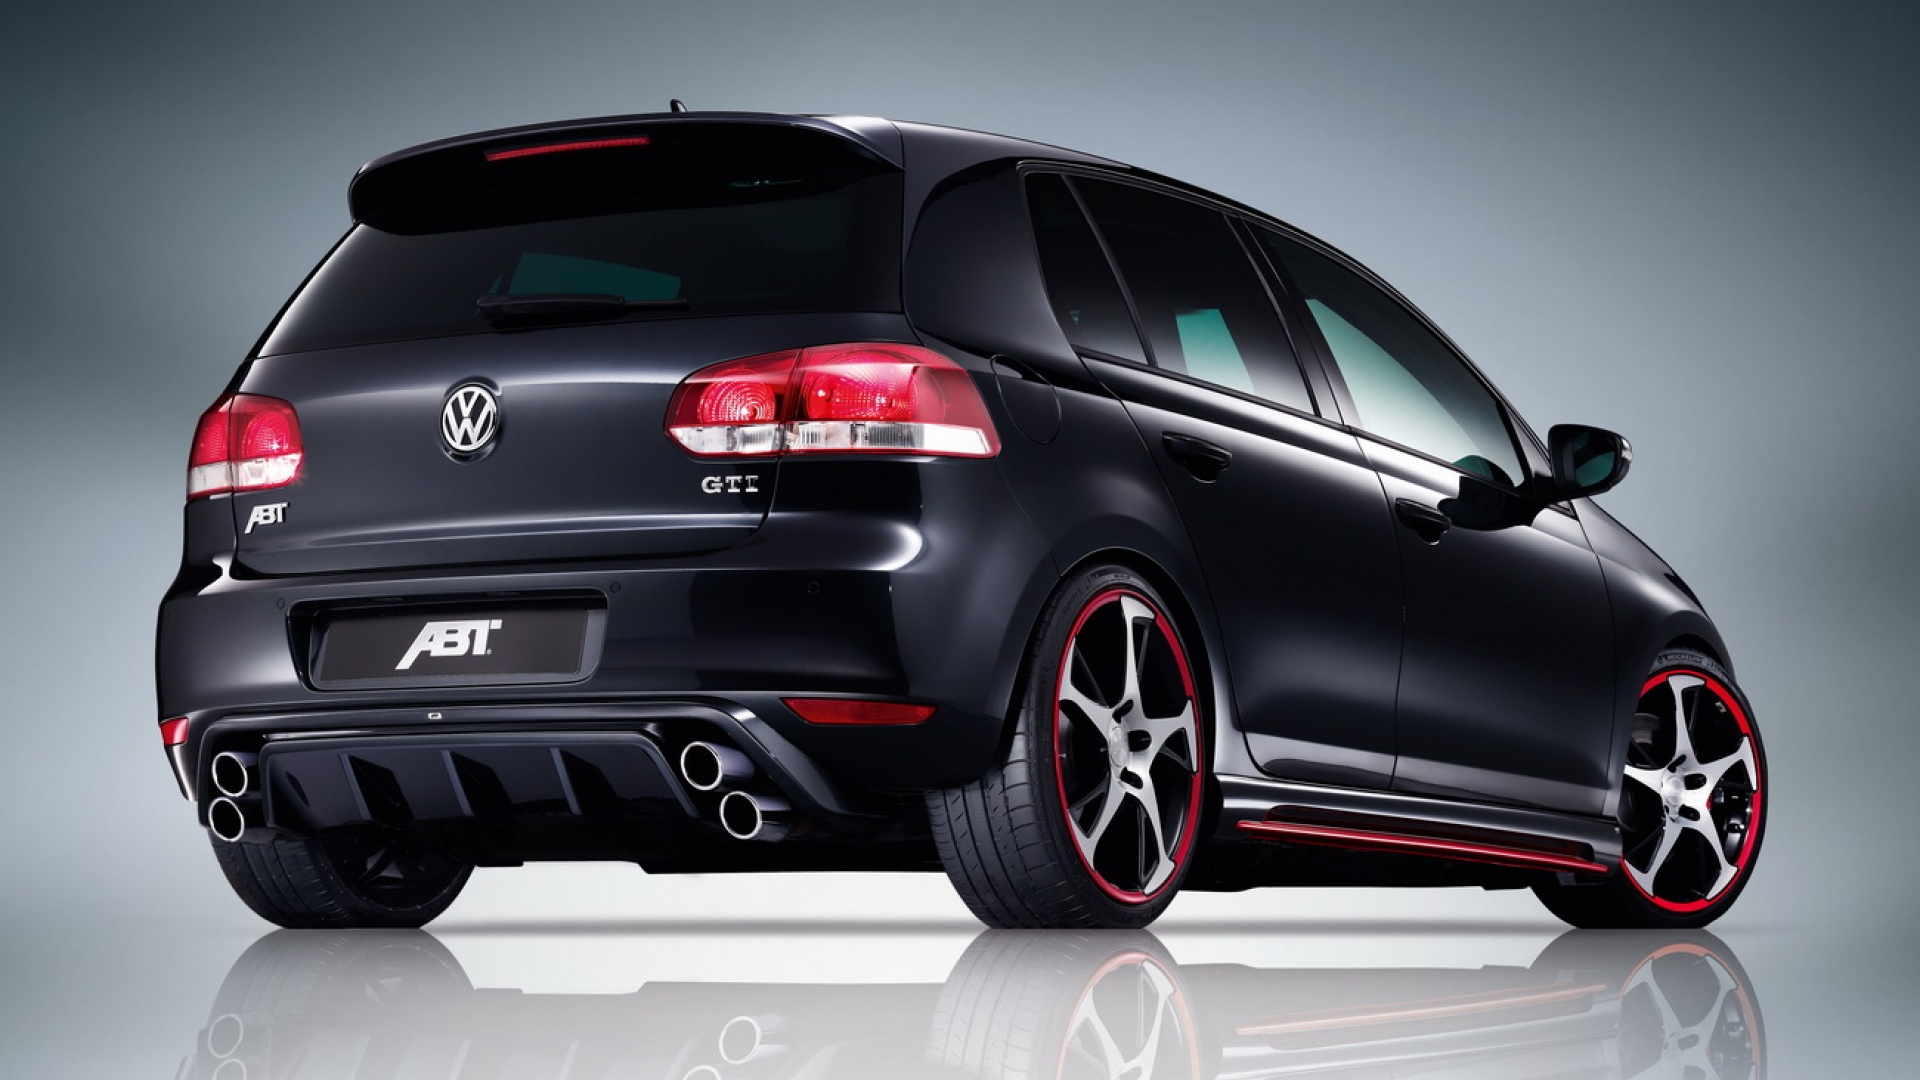 Vw Golf Gti Wallpaper S High Resolution Image For